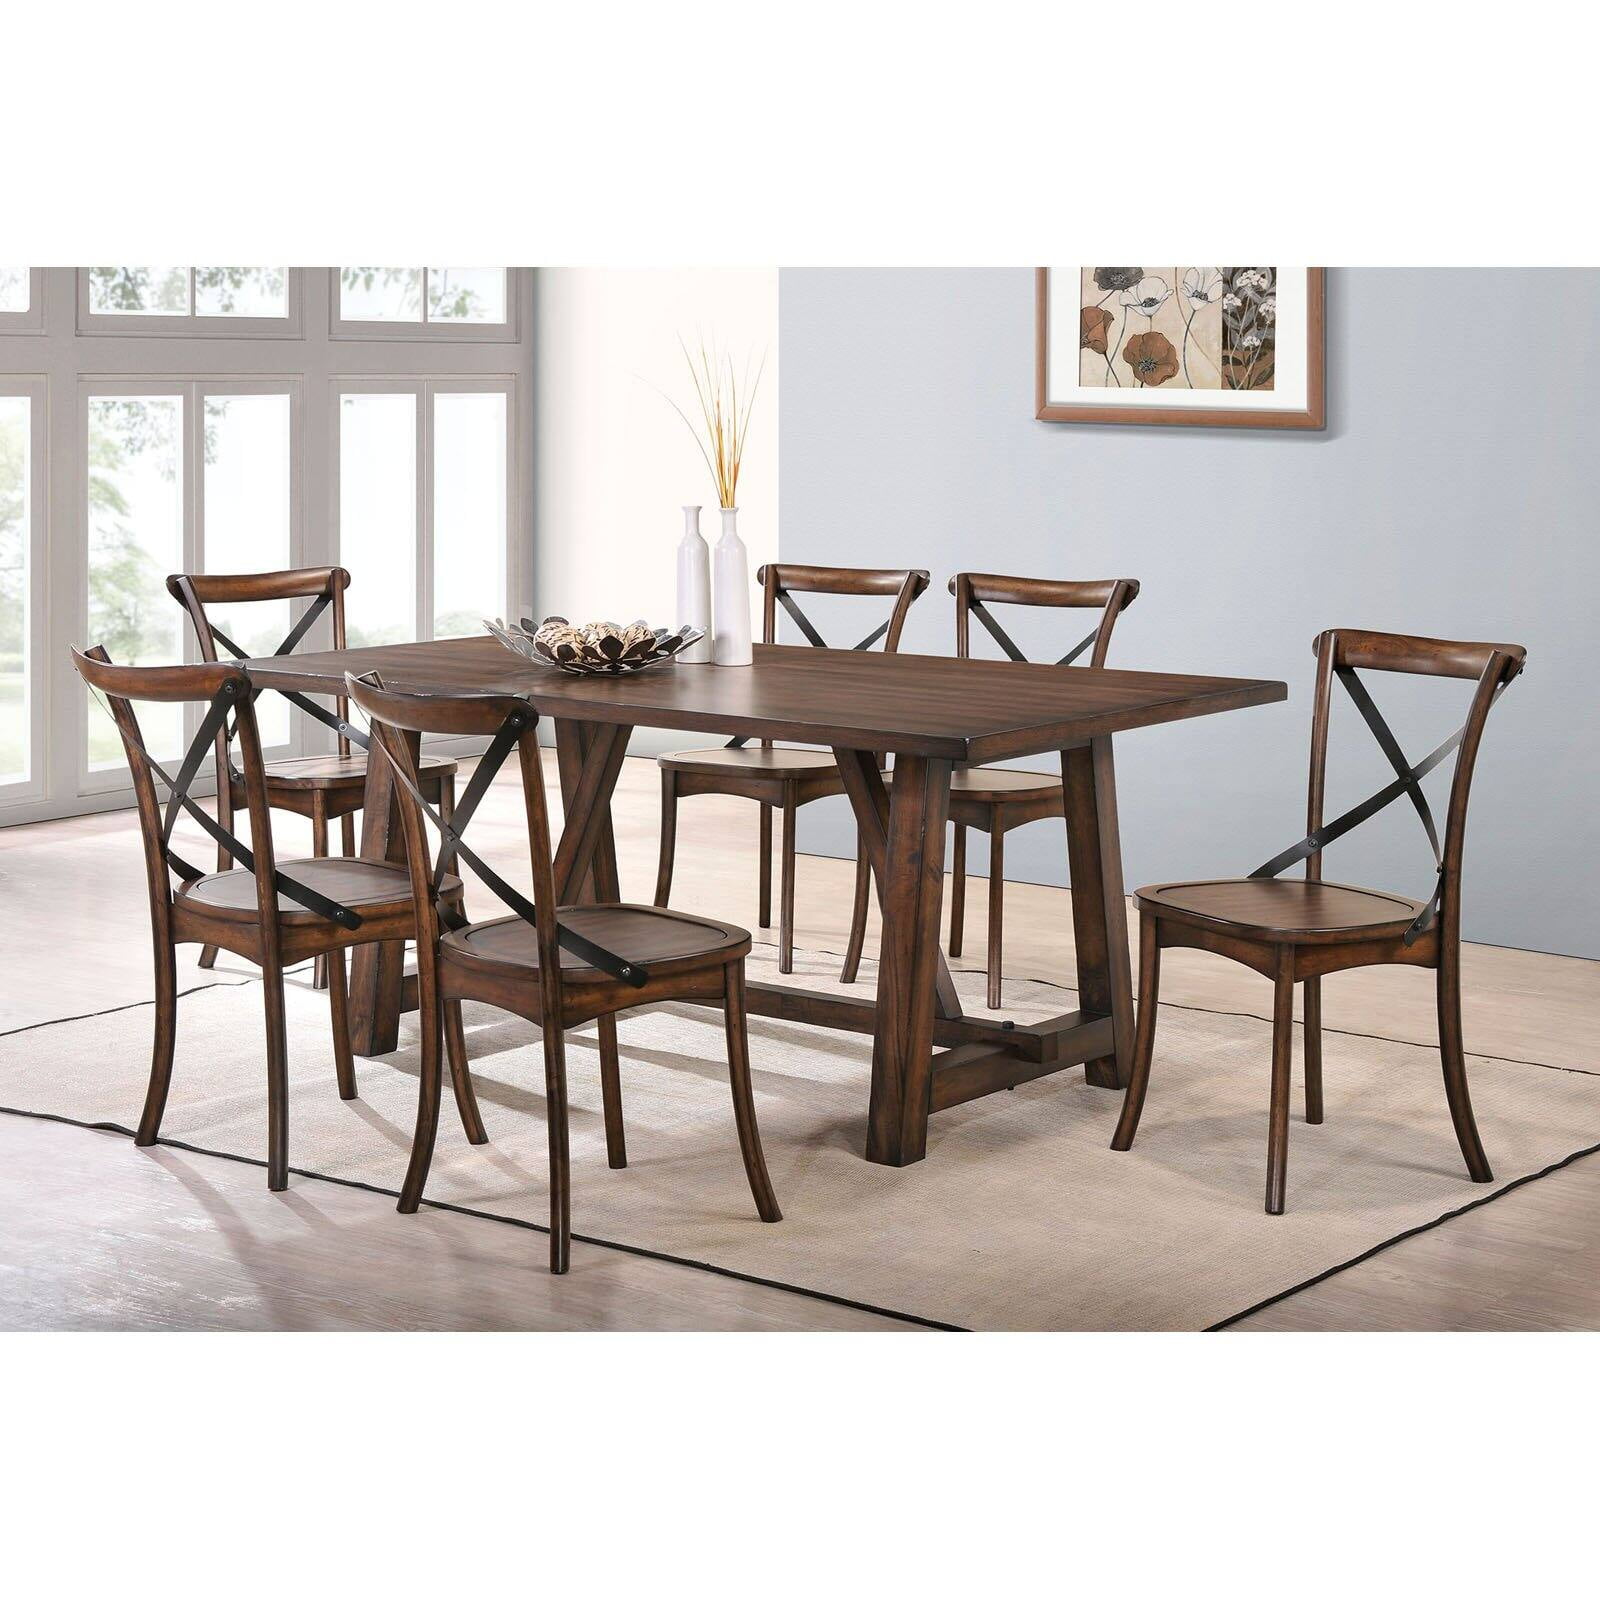 Photo 1 of Acme Furniture Kaelyn Dining Side Chairs - Set of 2